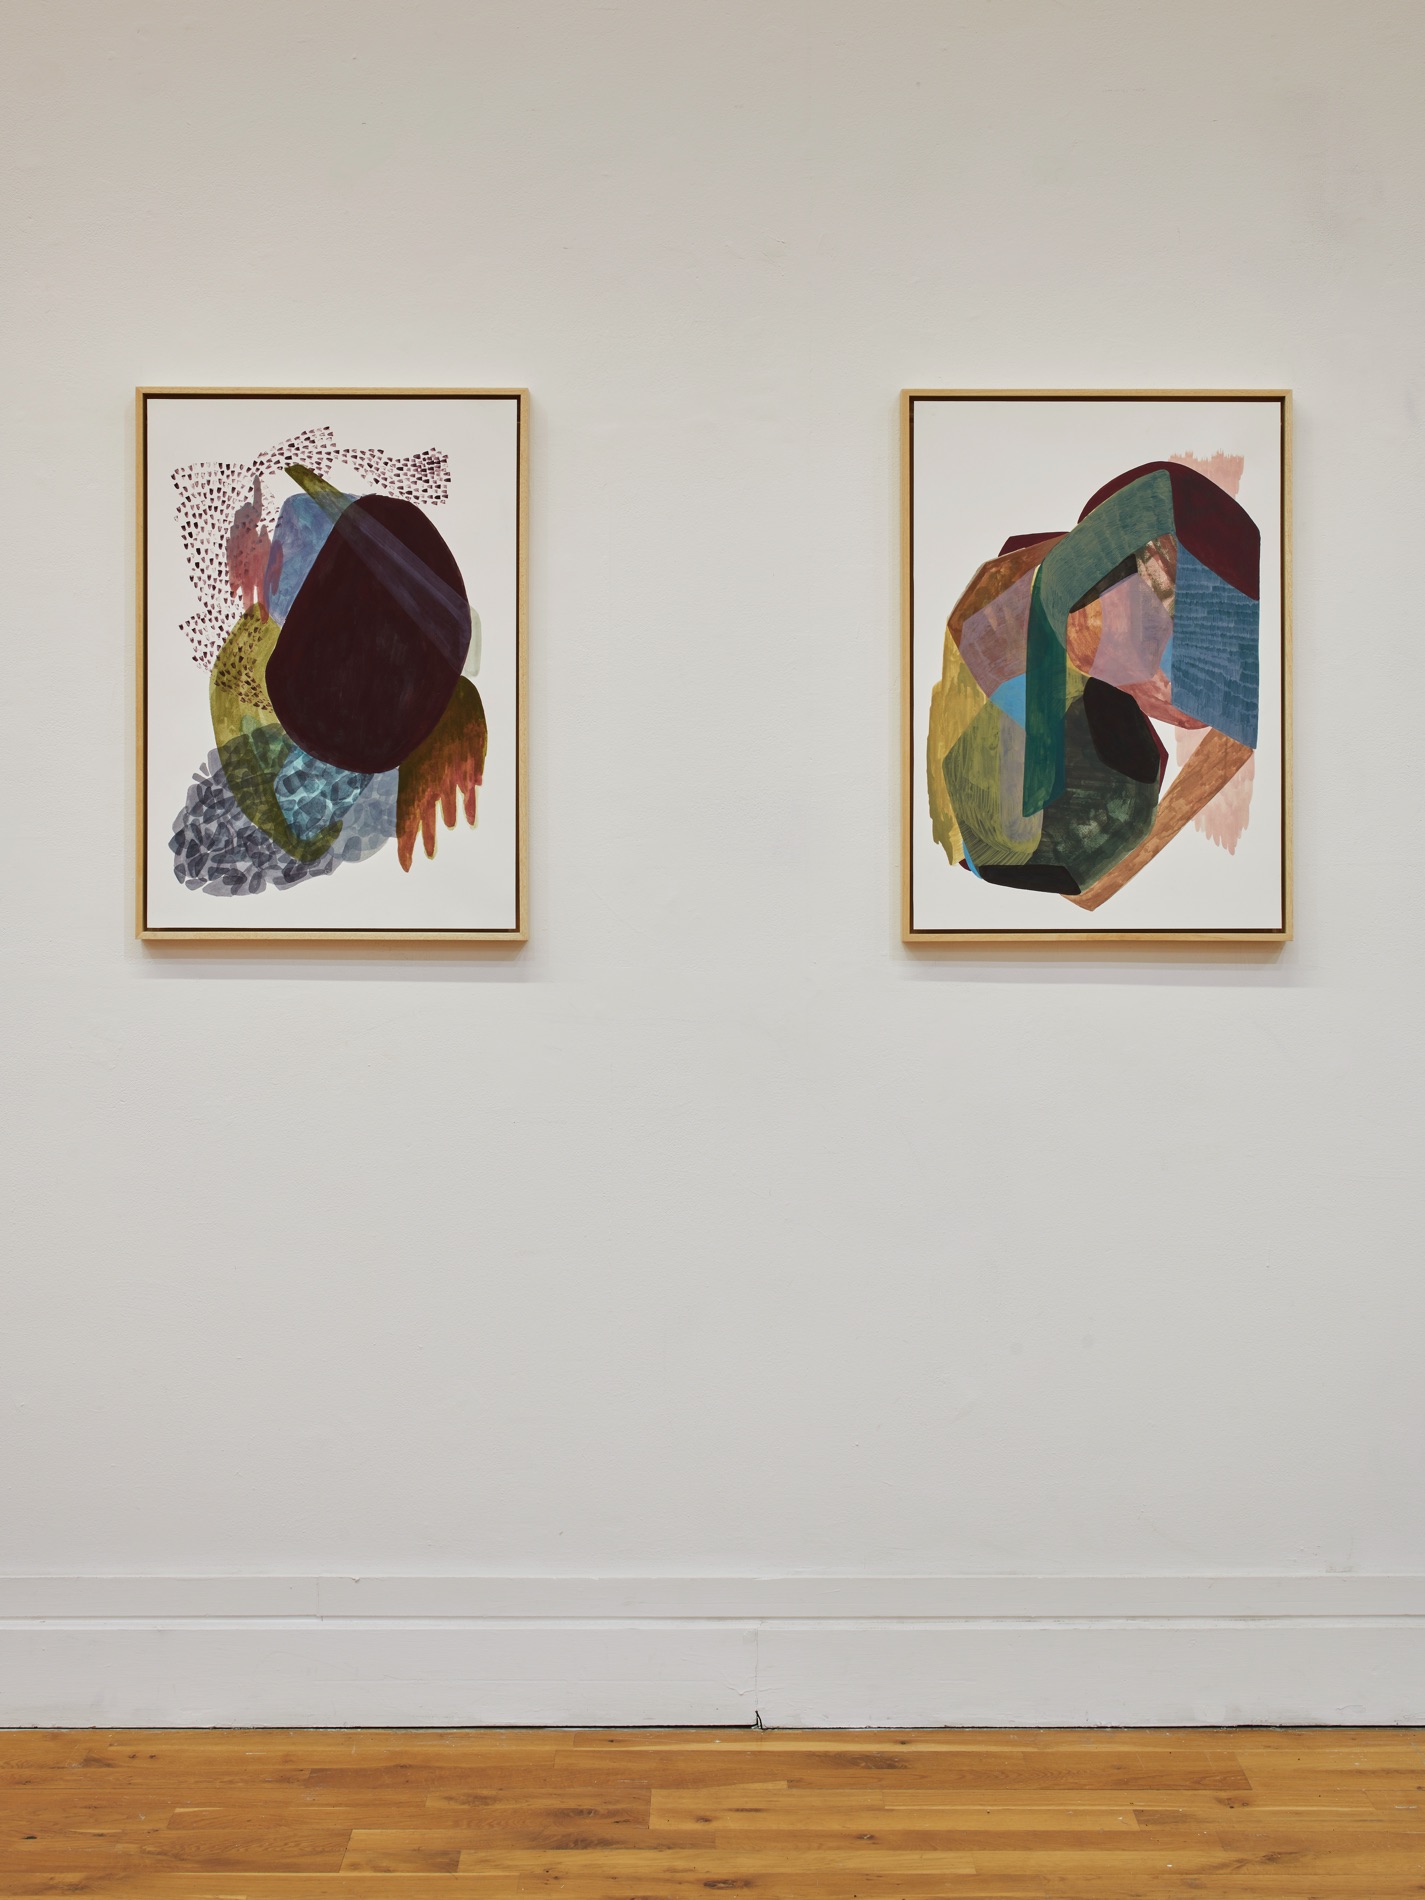 Jane Fogarty – Painting installation at the RHA gallery, Futures exhibition 2019-2020_tn